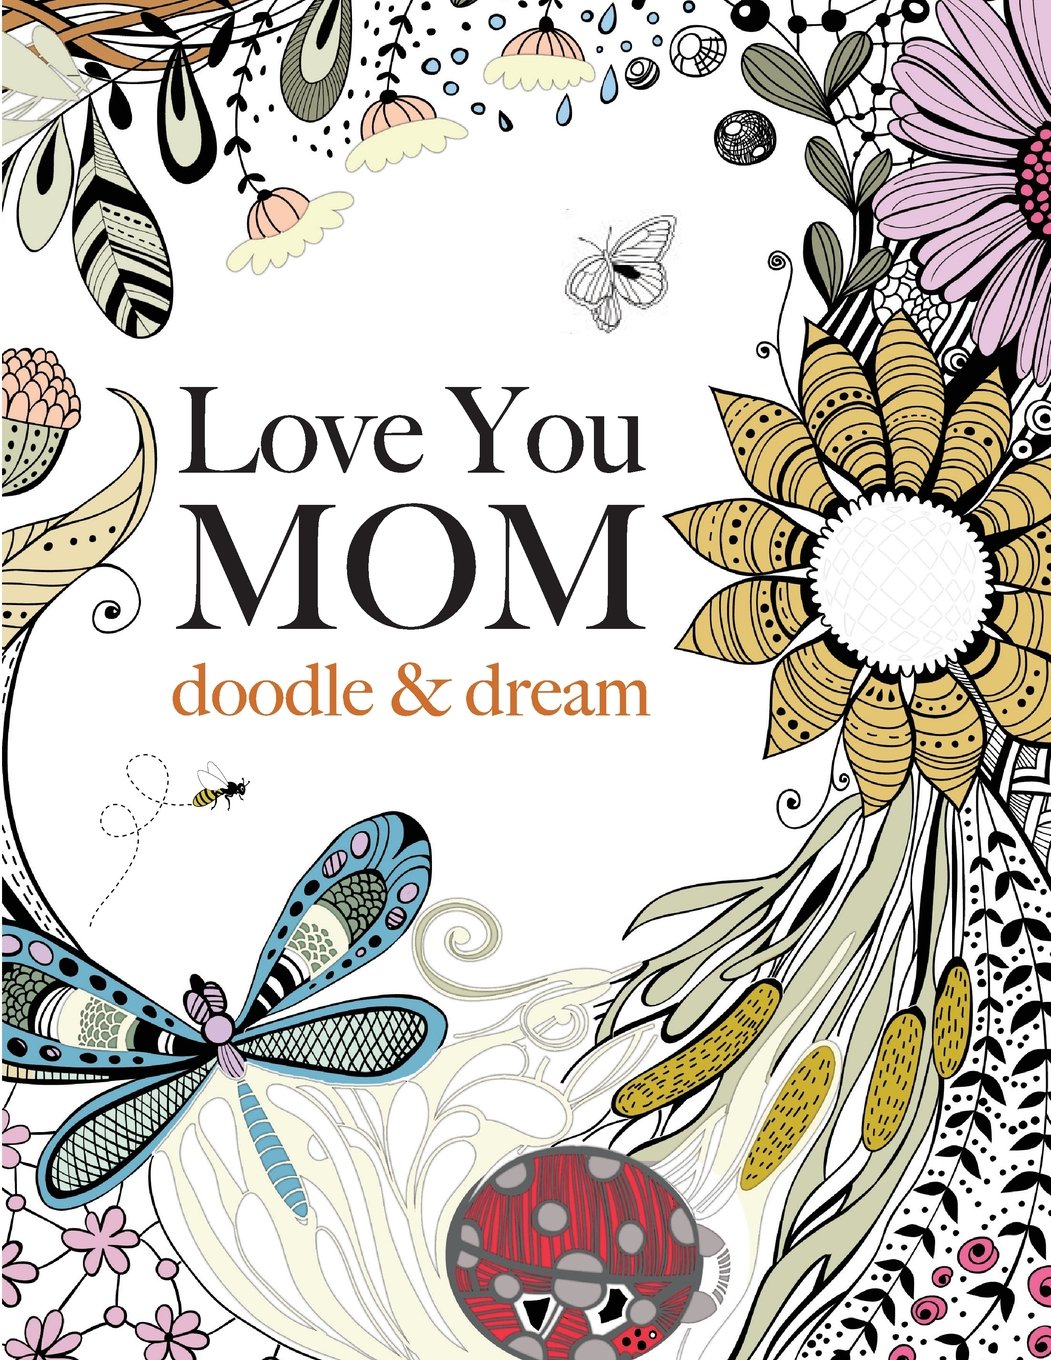 Love You MOM Doodle & Dream - A Beautiful and Inspiring Adult Coloring Book For Moms Everywhere - Don't know what to get for mom this Mother's Day? Here are a few Pretty Gifts For Mom on Mother's Day she will love! | OHMY-CREATIVE.COM